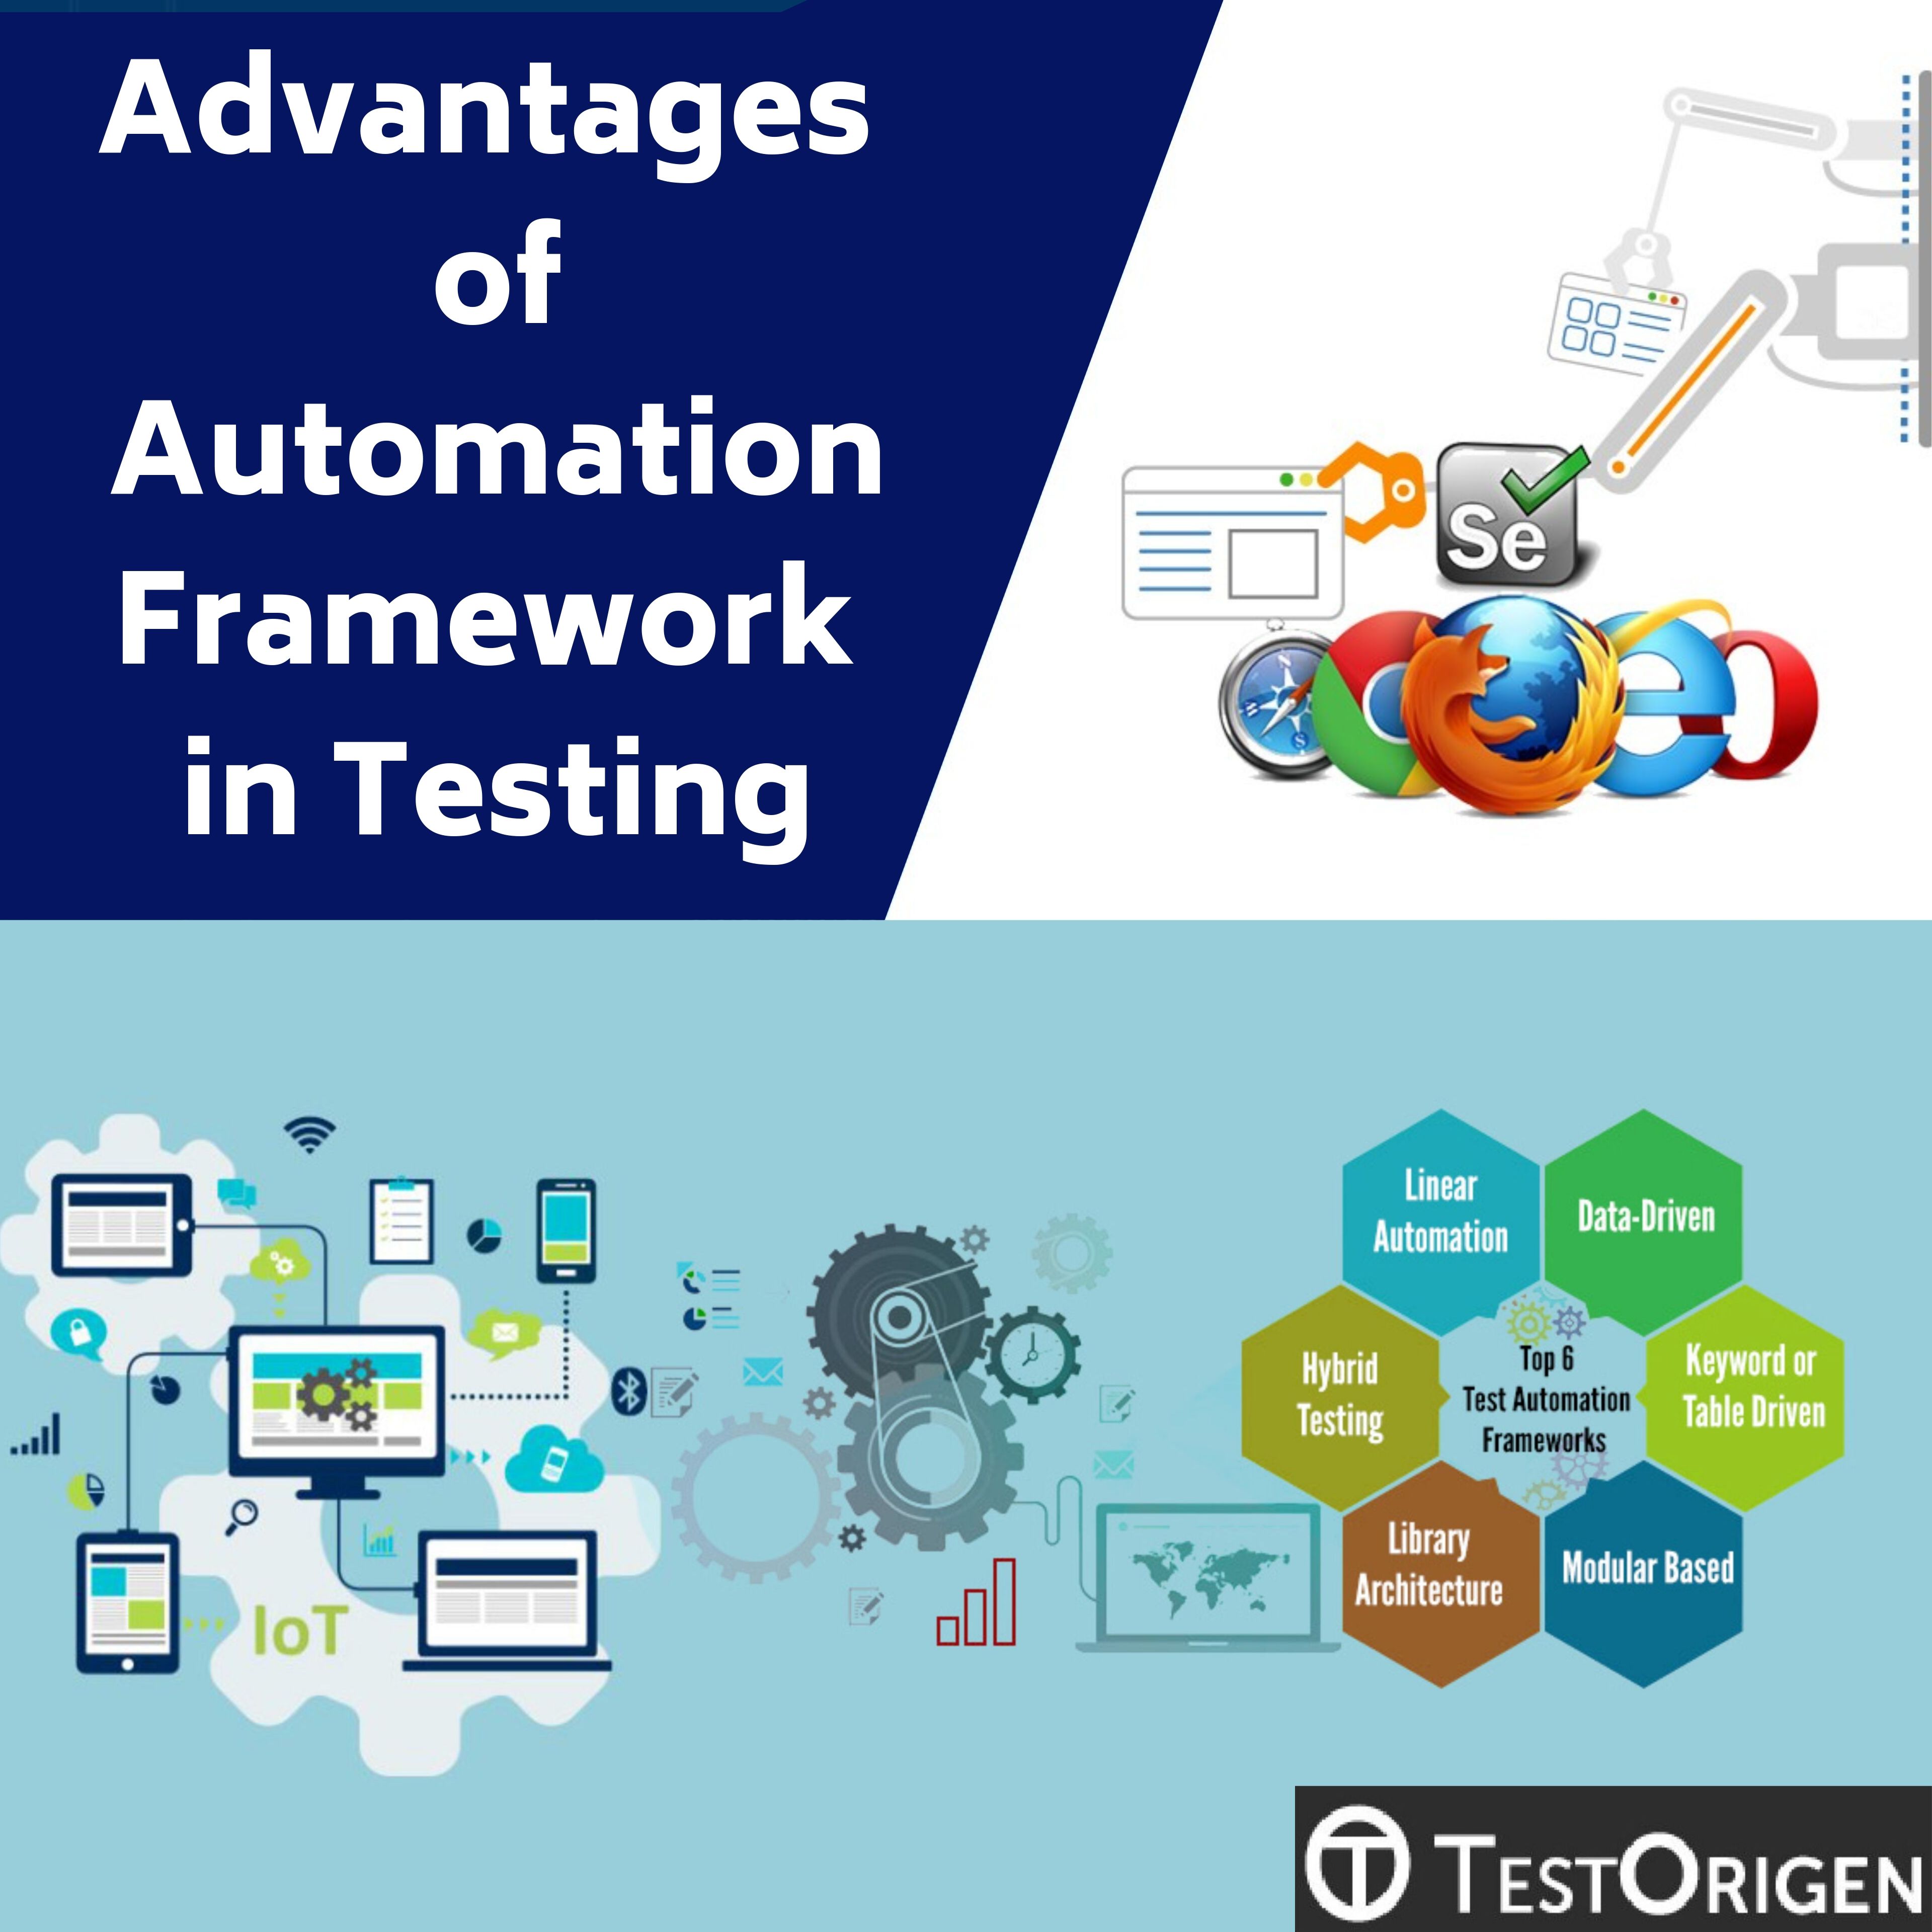 Advantages of Automation Framework in Testing